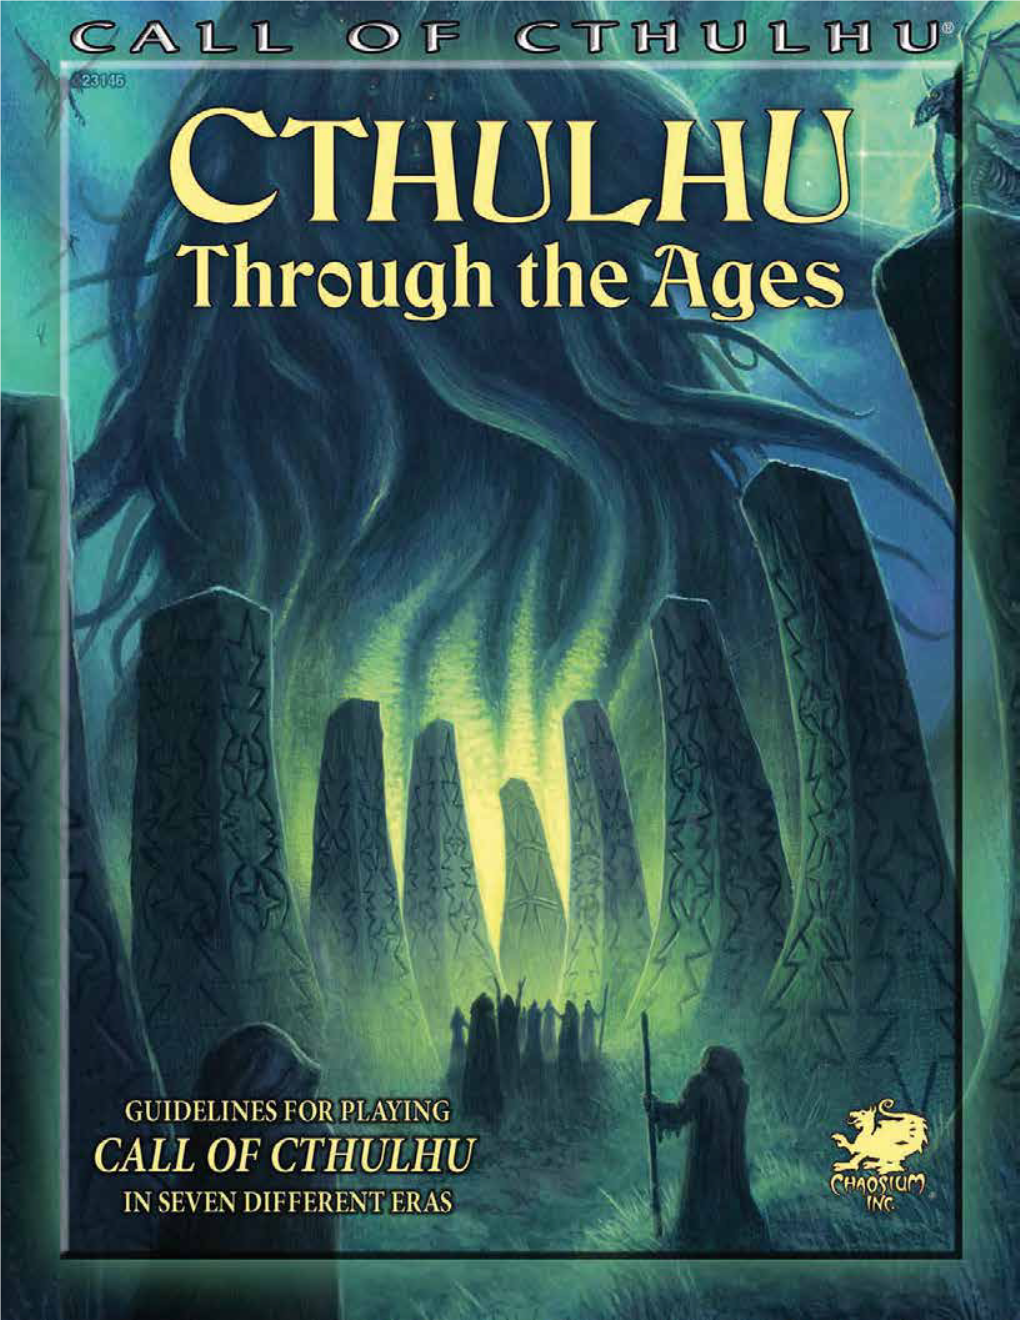 Cthulhu Through the Ages Is Copyright © 2014 by Chaosium Inc